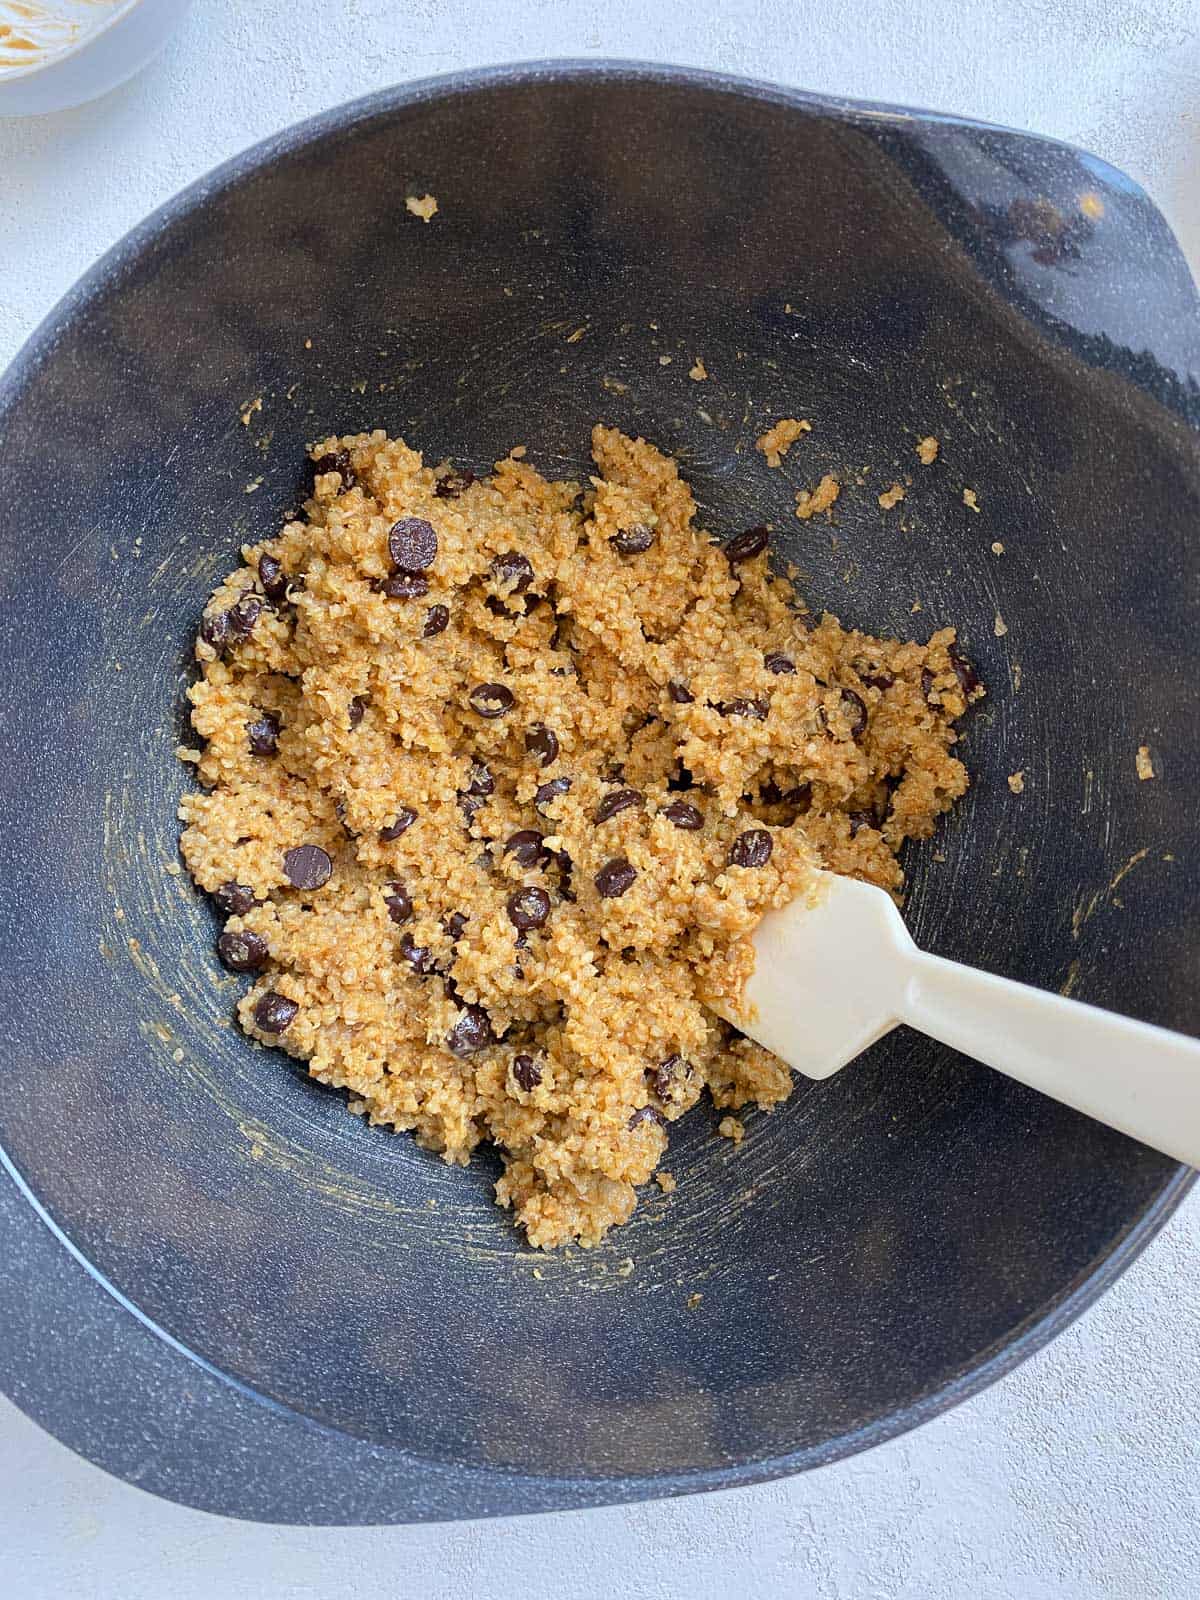 process shot of mixing Vegan Chocolate Chip Quinoa Cookies ingredients in a bowl